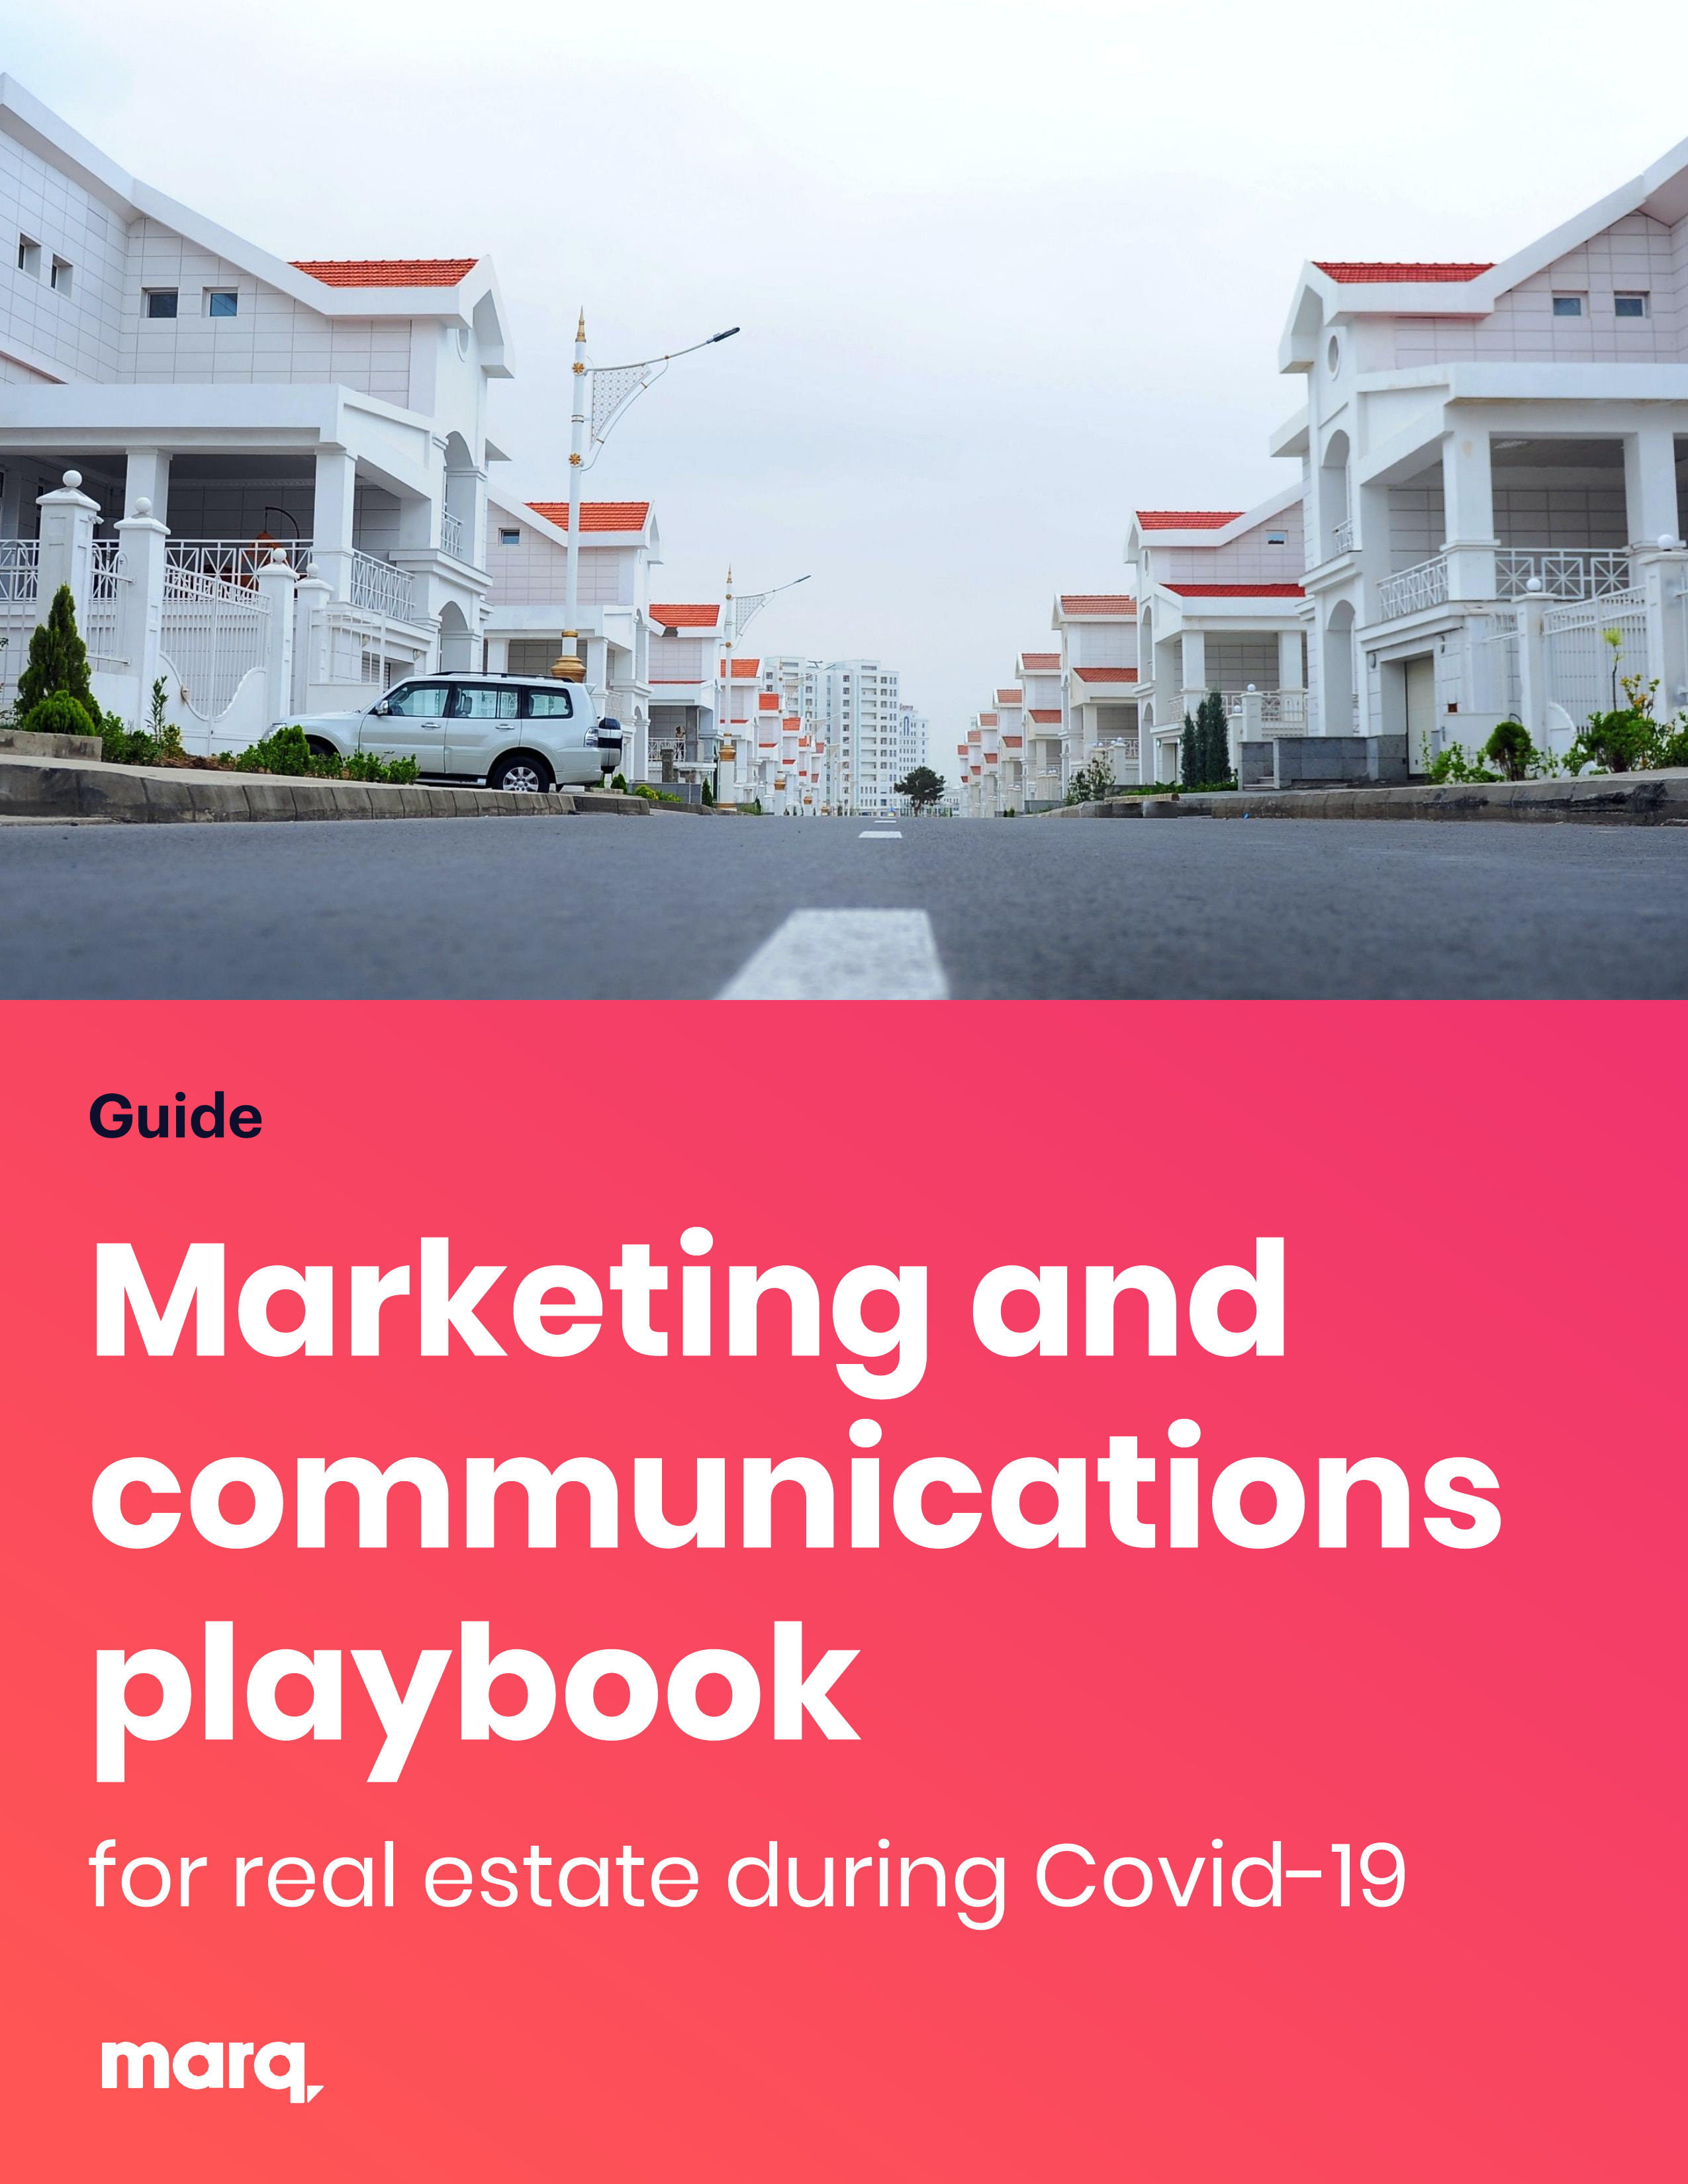 ebook-marketing-and-communications-playbook-real-estate-covid